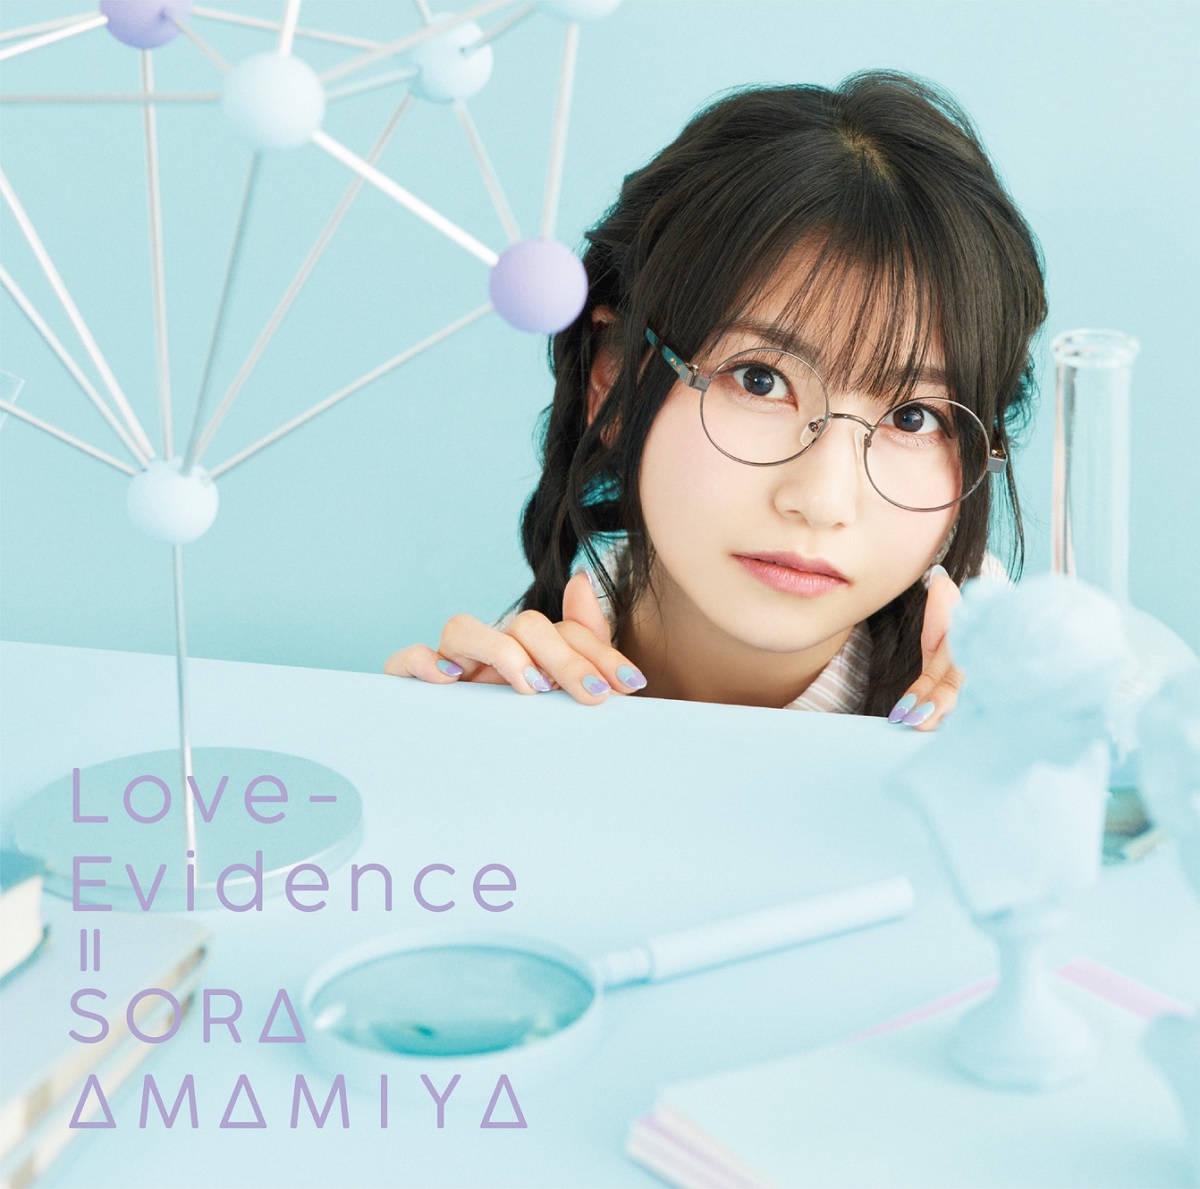 Cover art for『Sora Amamiya - Love-Evidence』from the release『Love-Evidence』